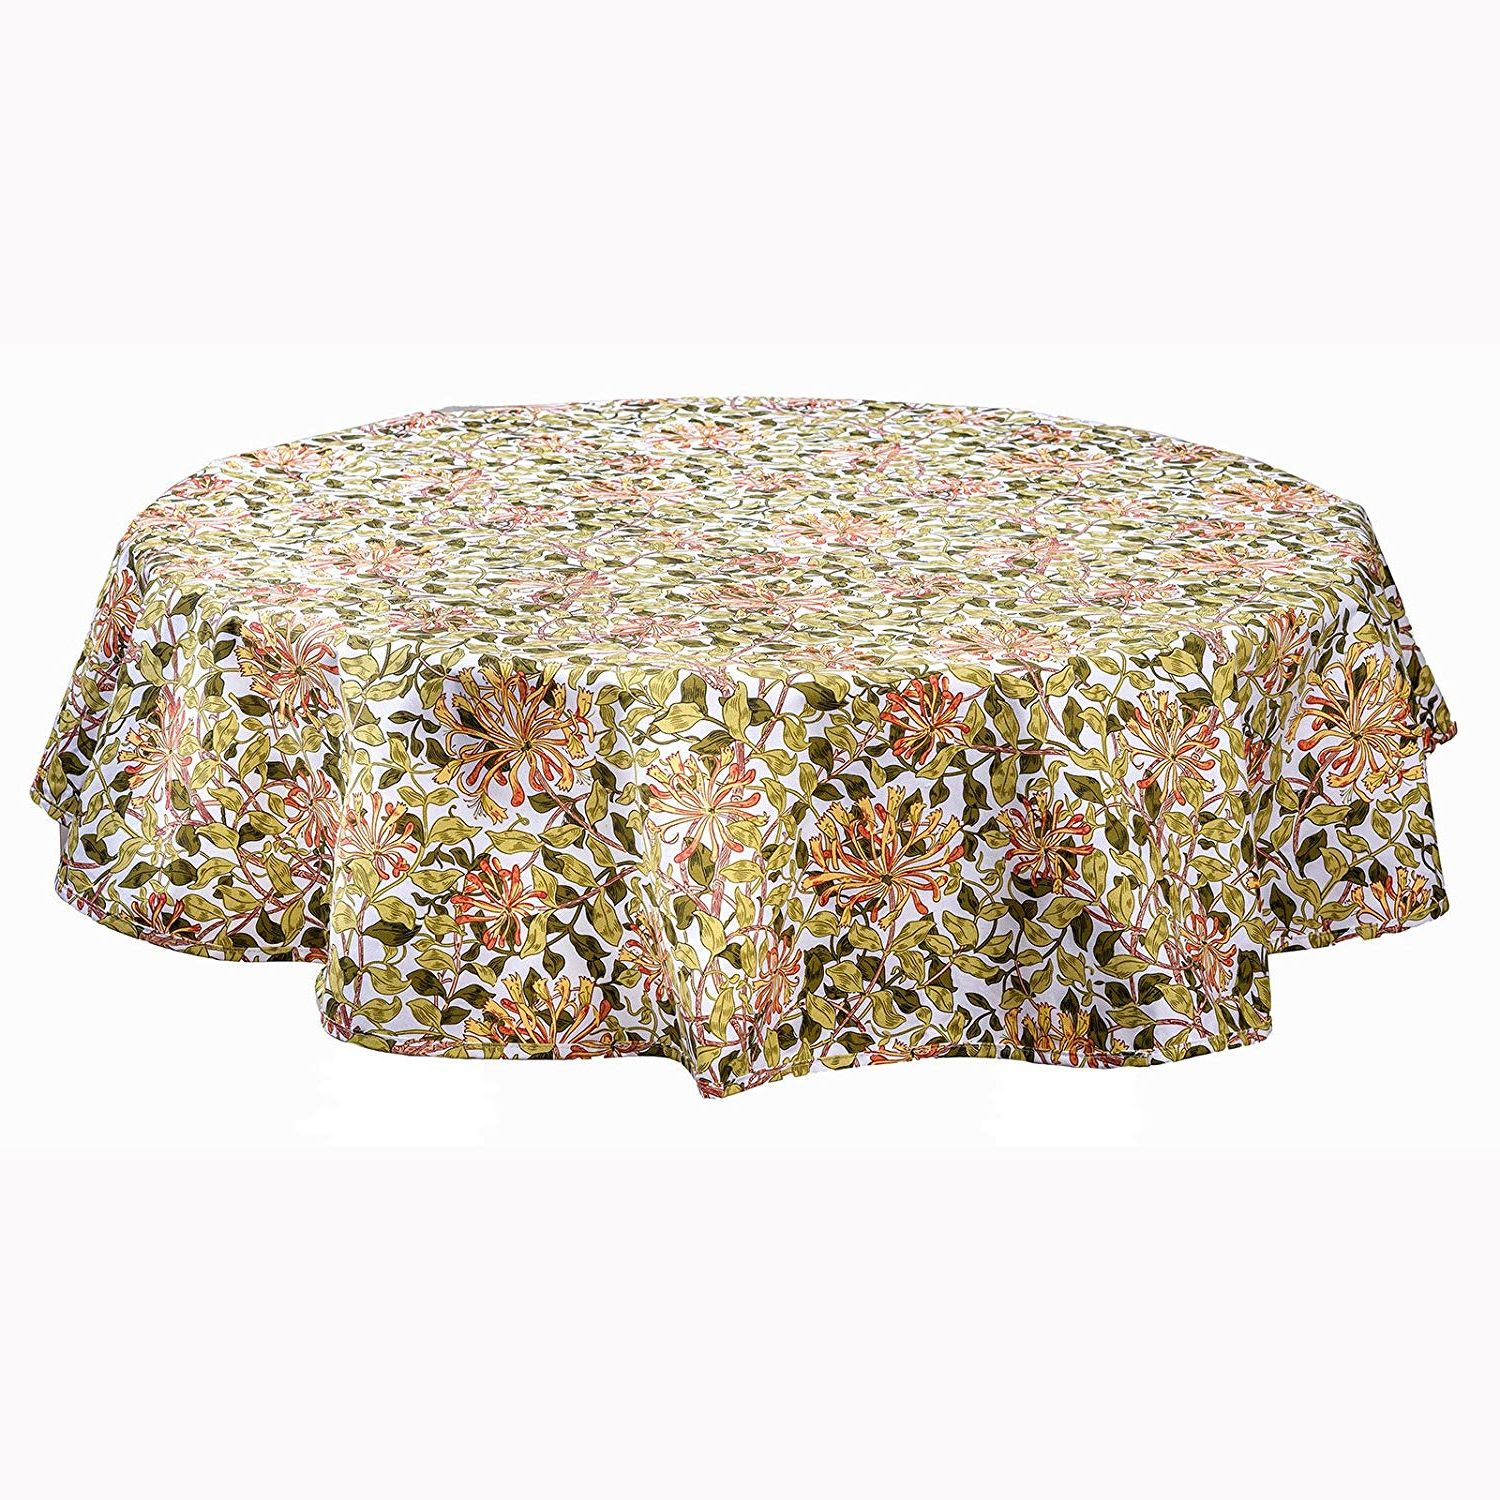 [%william Morris Gallery Honeysuckle 100% Cotton Tablecloth With Recent Morris Round Dining Tables|morris Round Dining Tables Within Well Known William Morris Gallery Honeysuckle 100% Cotton Tablecloth|latest Morris Round Dining Tables Inside William Morris Gallery Honeysuckle 100% Cotton Tablecloth|popular William Morris Gallery Honeysuckle 100% Cotton Tablecloth Regarding Morris Round Dining Tables%] (Photo 13 of 25)